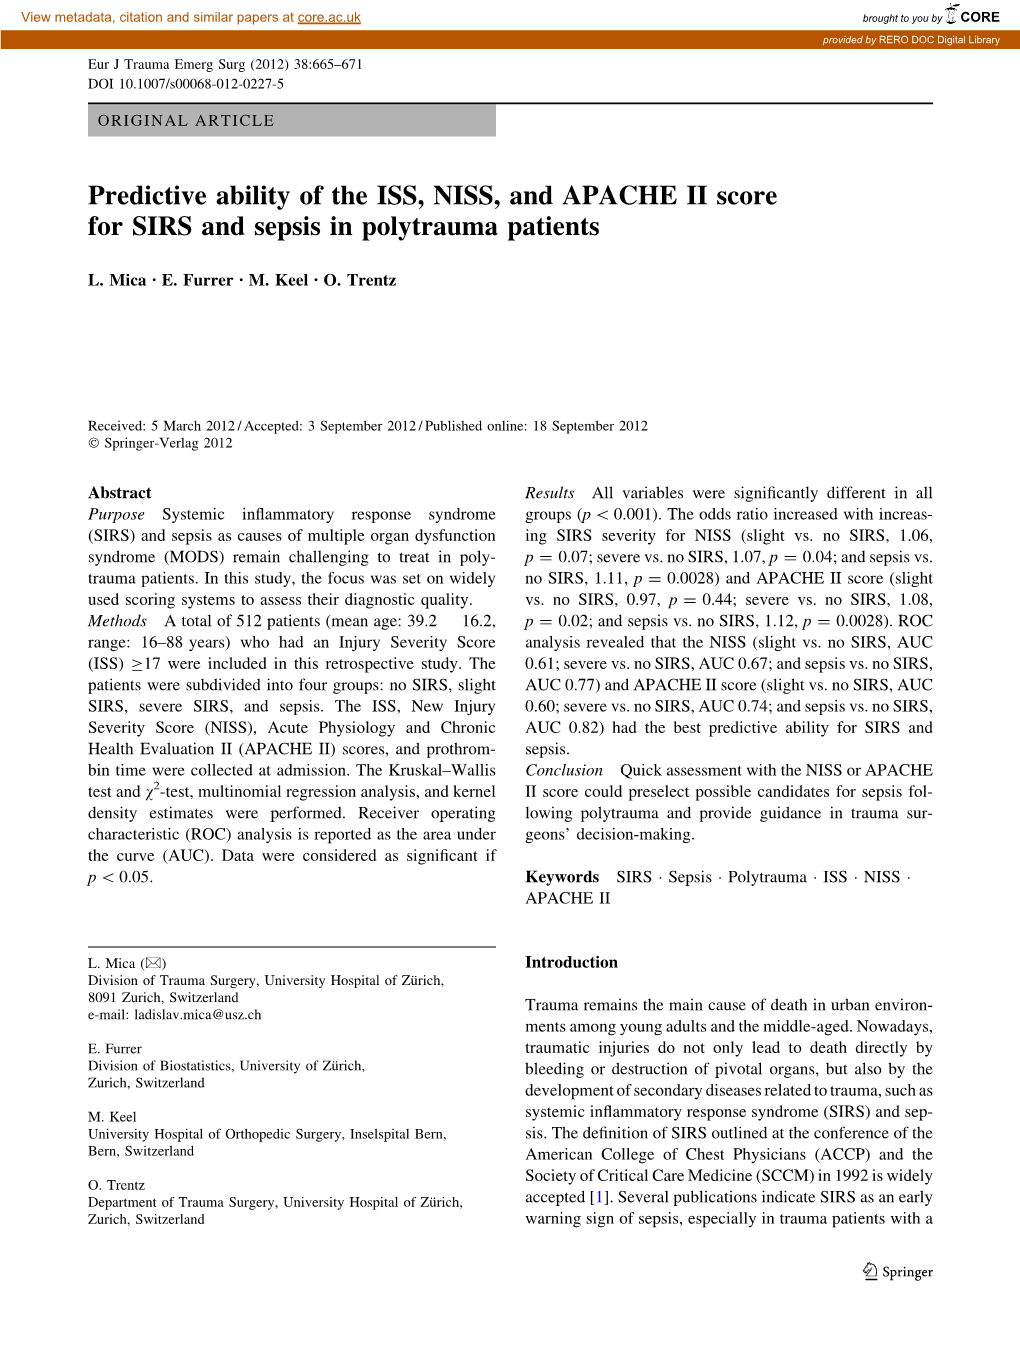 Predictive Ability of the ISS, NISS, and APACHE II Score for SIRS and Sepsis in Polytrauma Patients